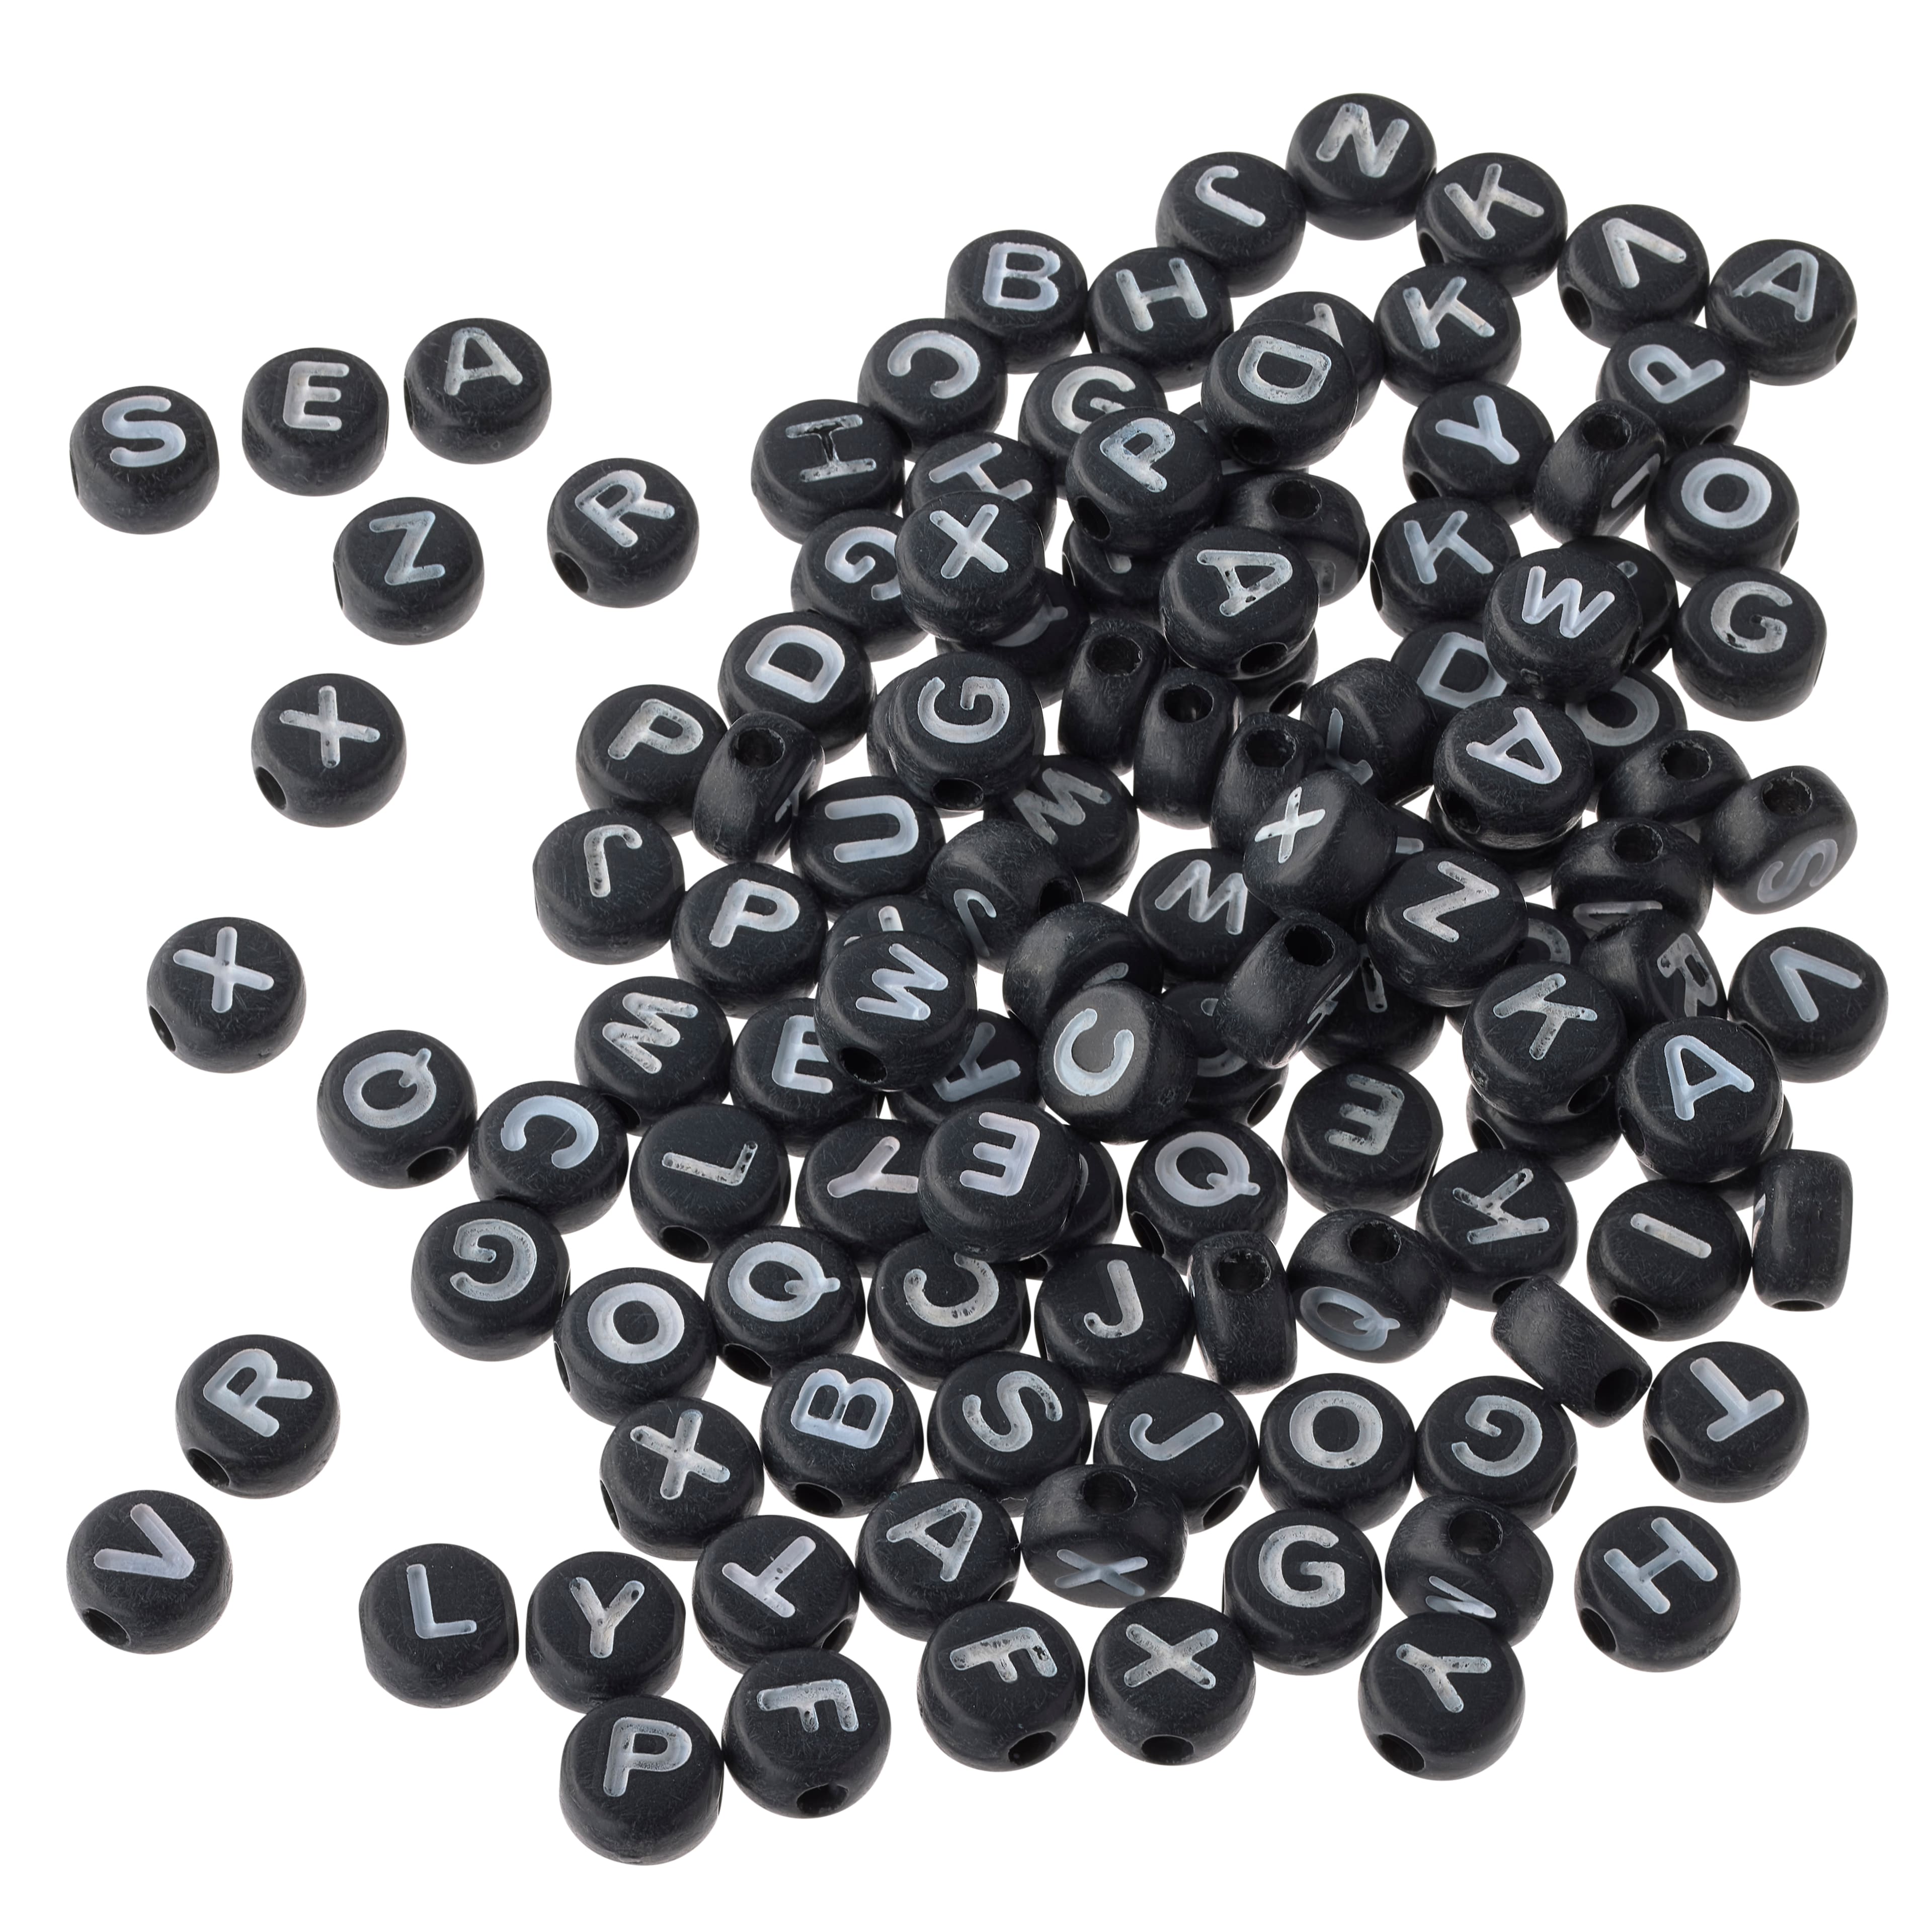 Black Letter Beads for Jewelry Making, Black Alphabet Beads for Name  Bracelet, Name Jewelry, Letter Jewelry, Spooky Beads for Bracelet 